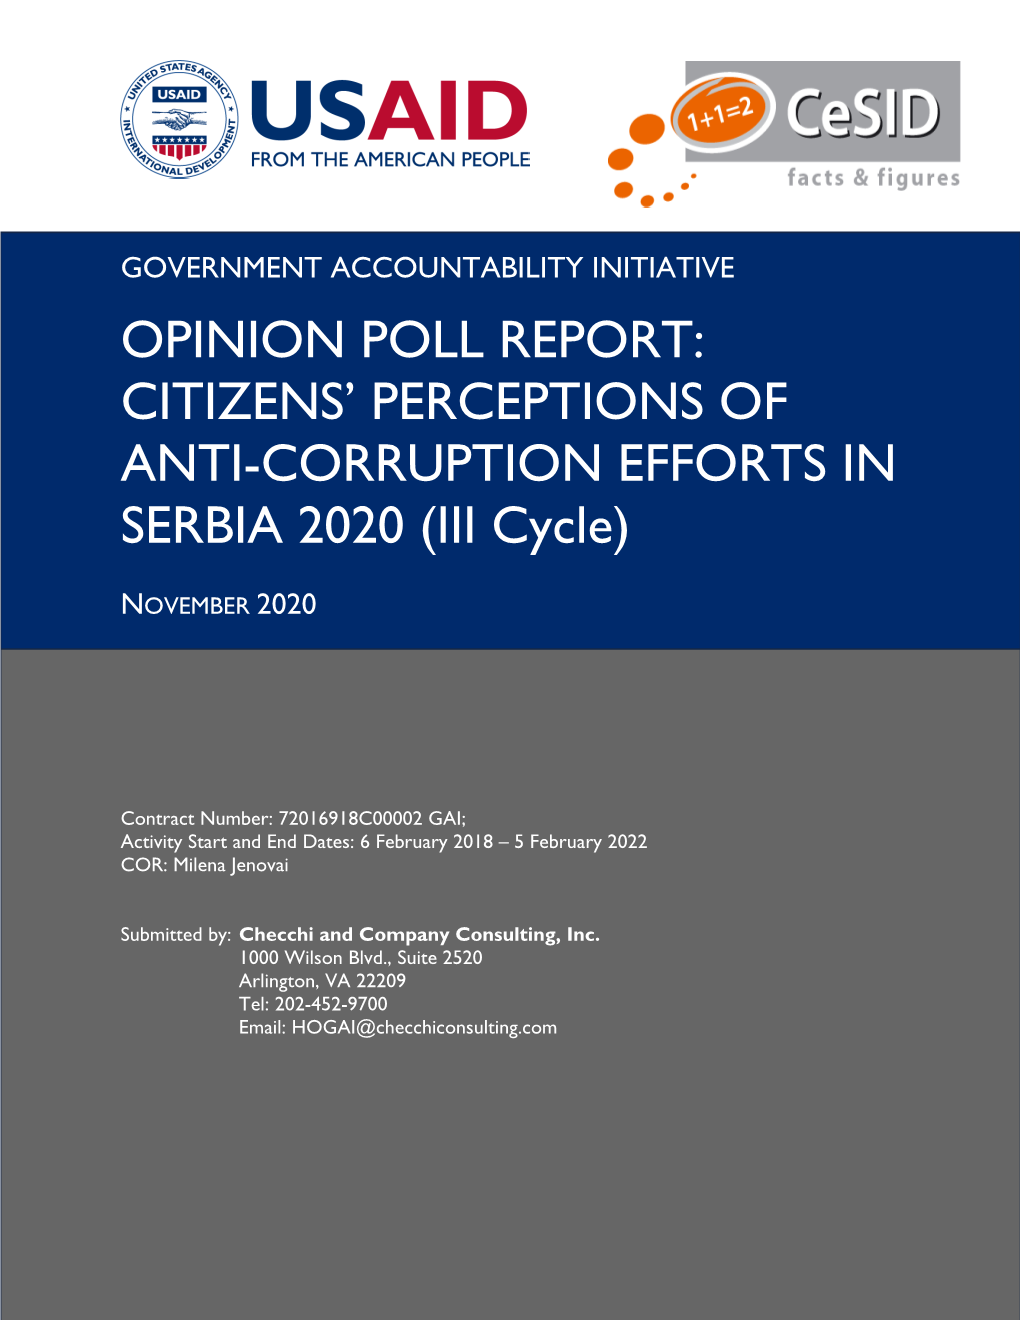 Citizens' Perceptions of Anti-Corruption Efforts In